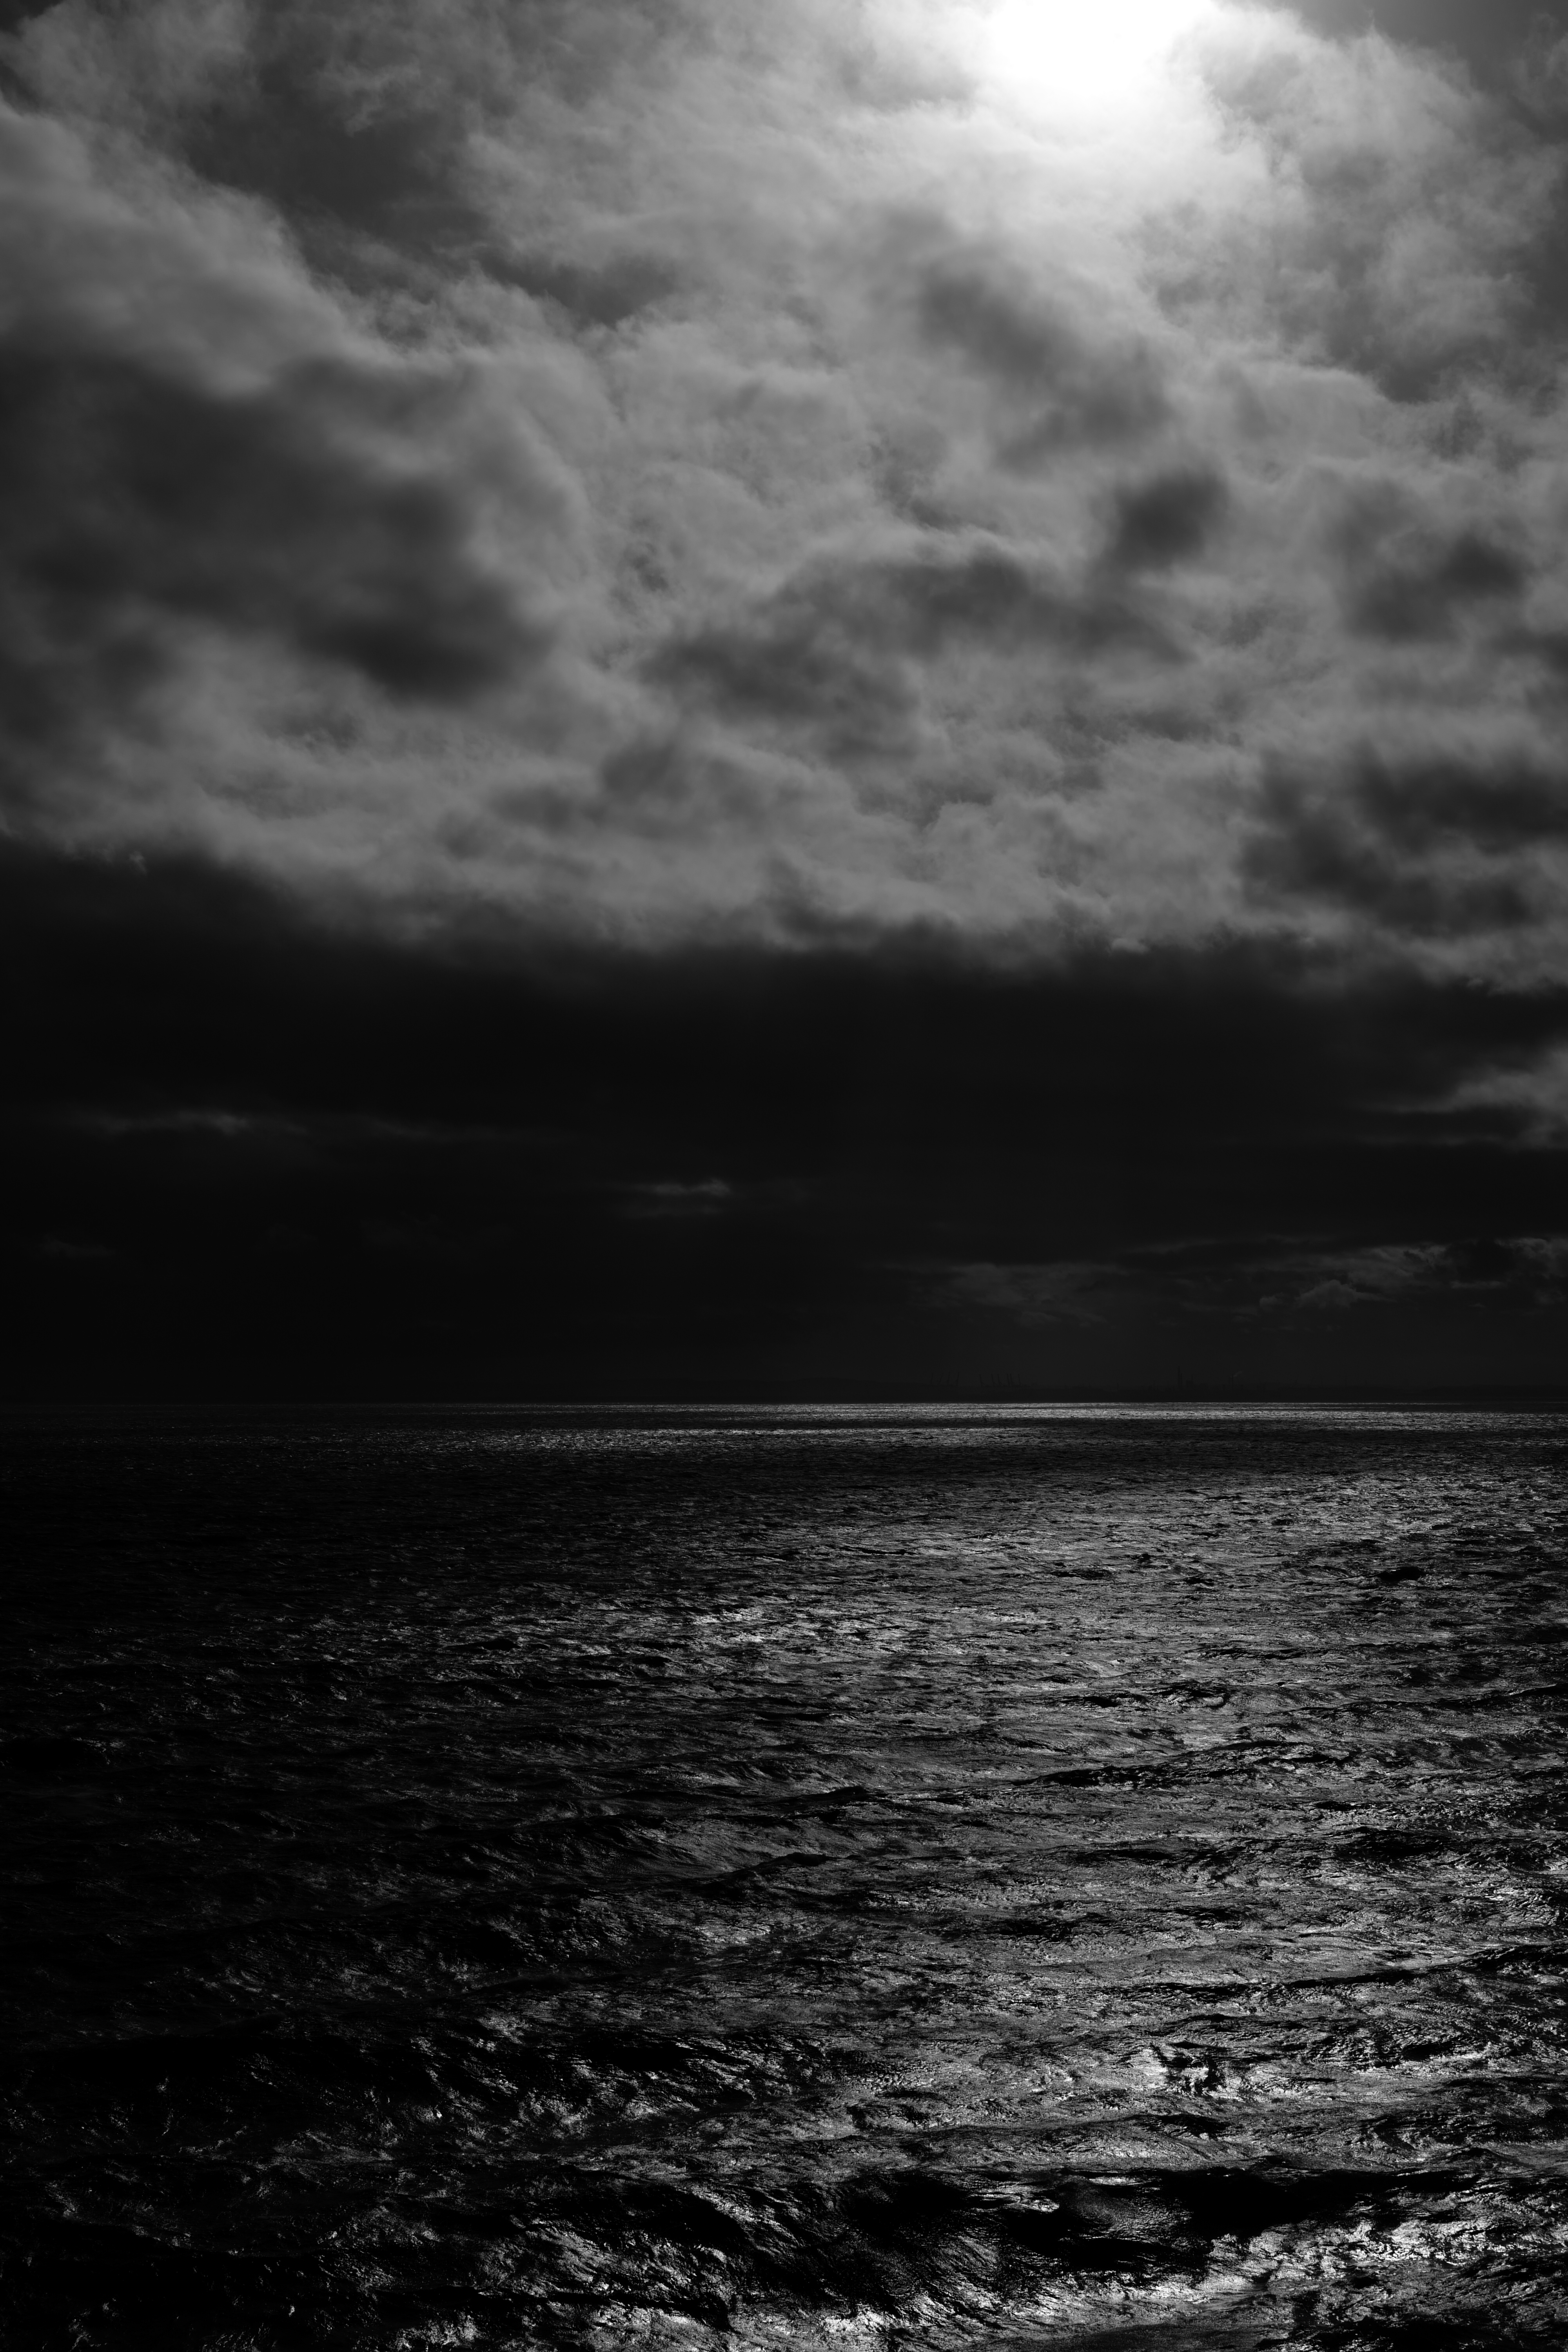 android clouds, mainly cloudy, sea, black, horizon, ripples, ripple, bw, chb, overcast